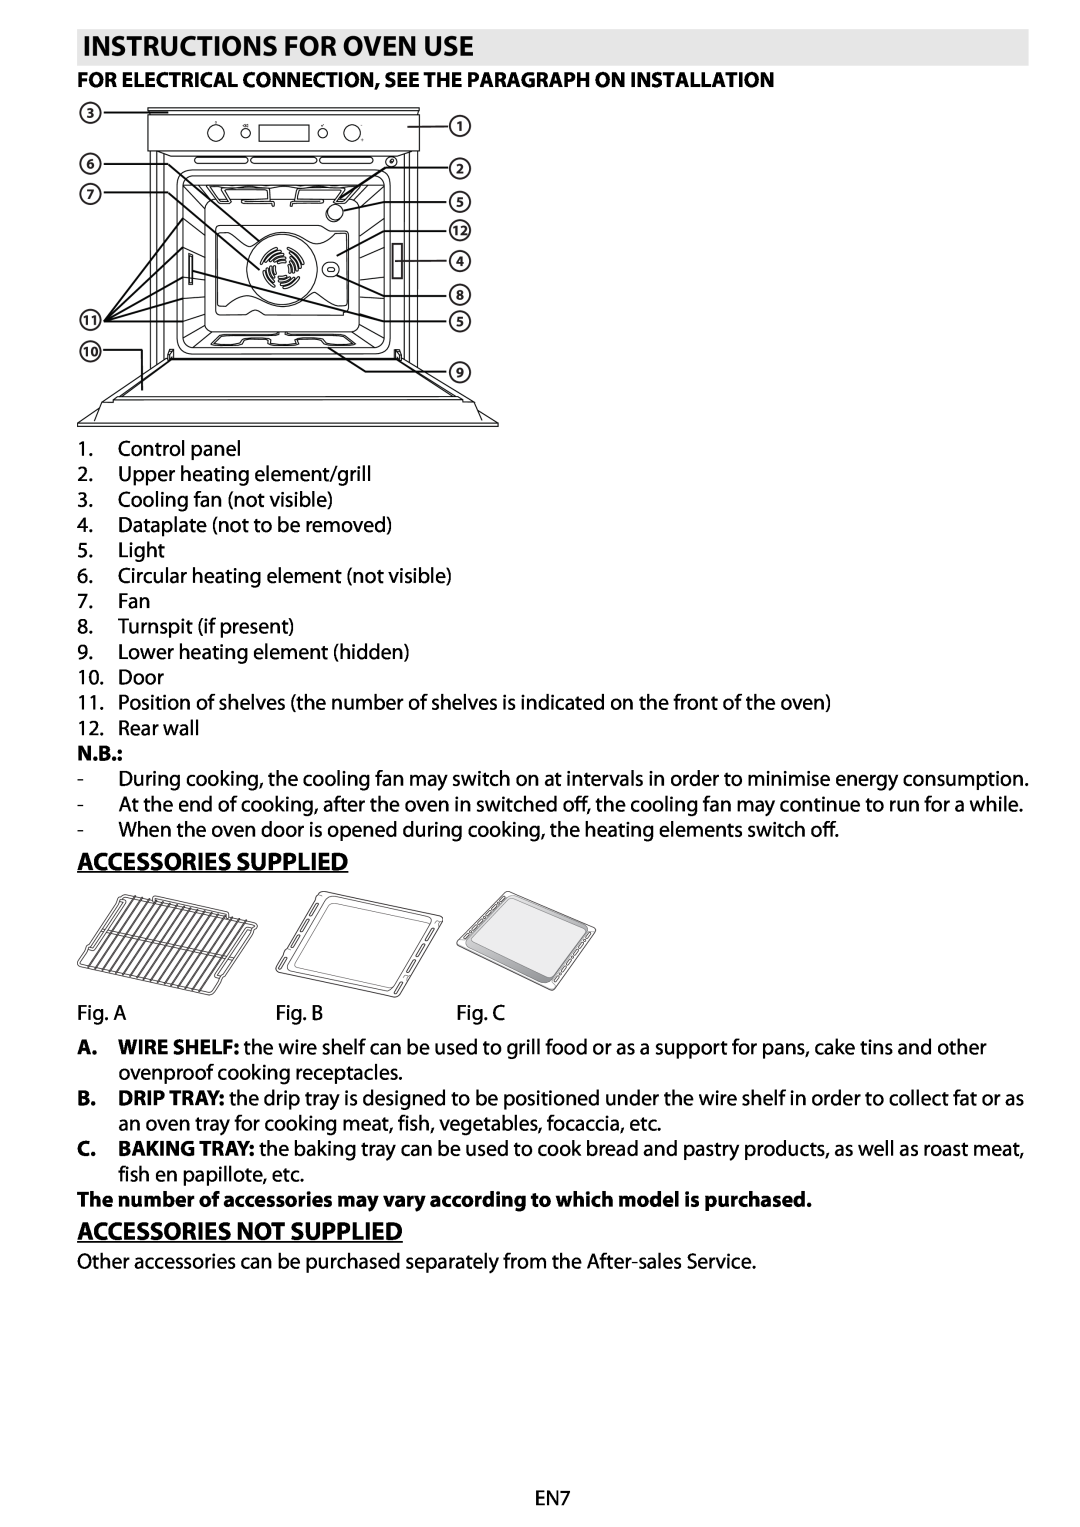 Whirlpool AKZM 654 manual Instructions For Oven Use, Accessories Supplied, Accessories Not Supplied 